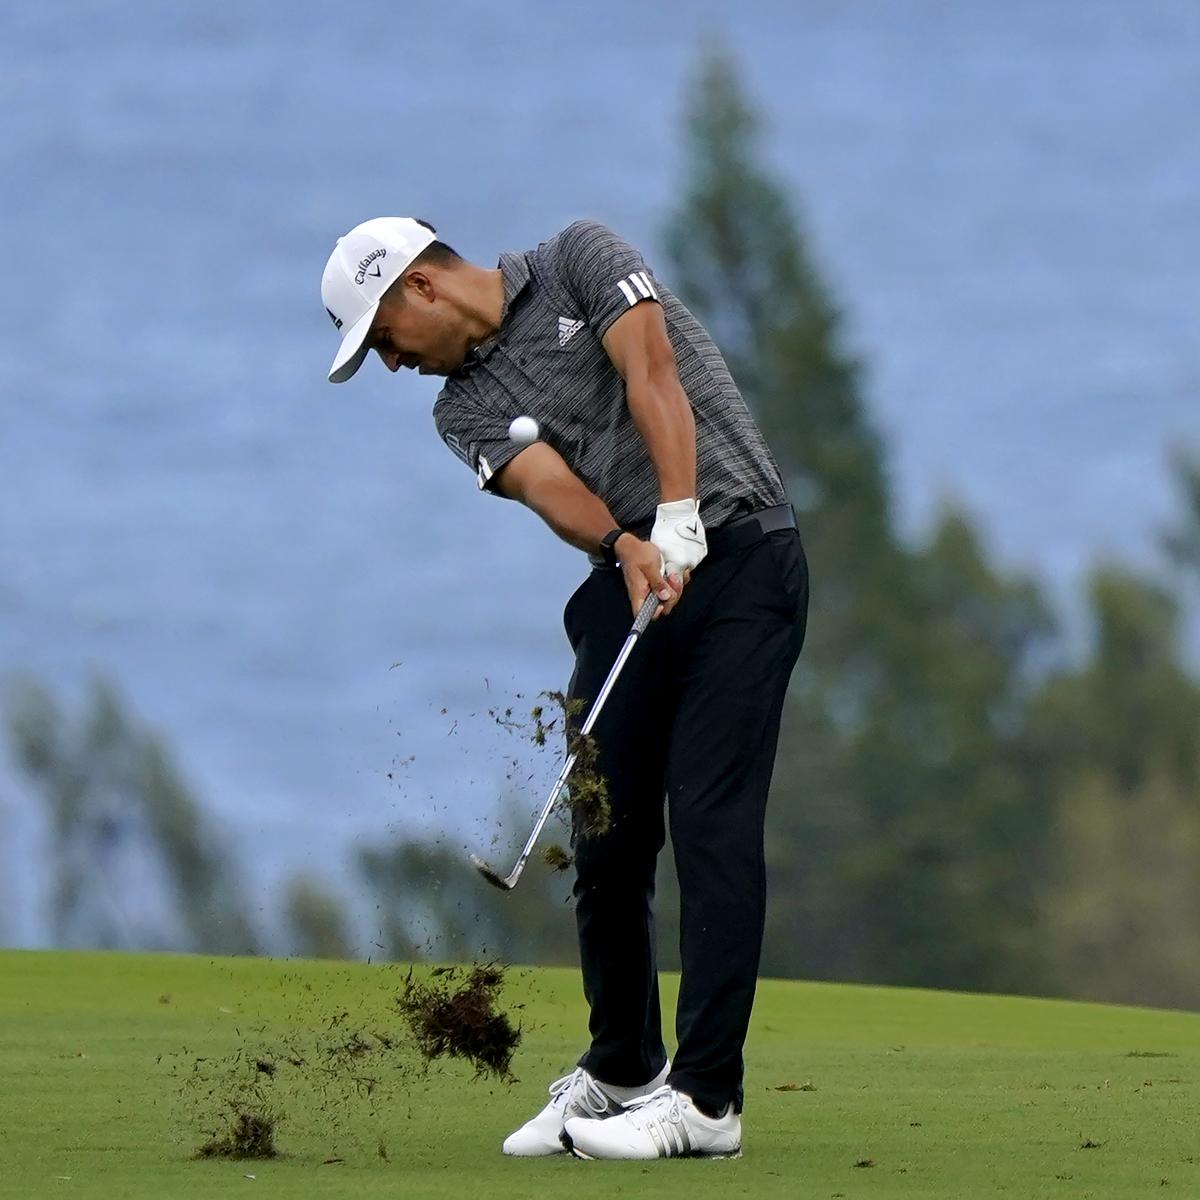 Tournament of Champions 2020 Xander Schauffele Leads by 1 Stroke After